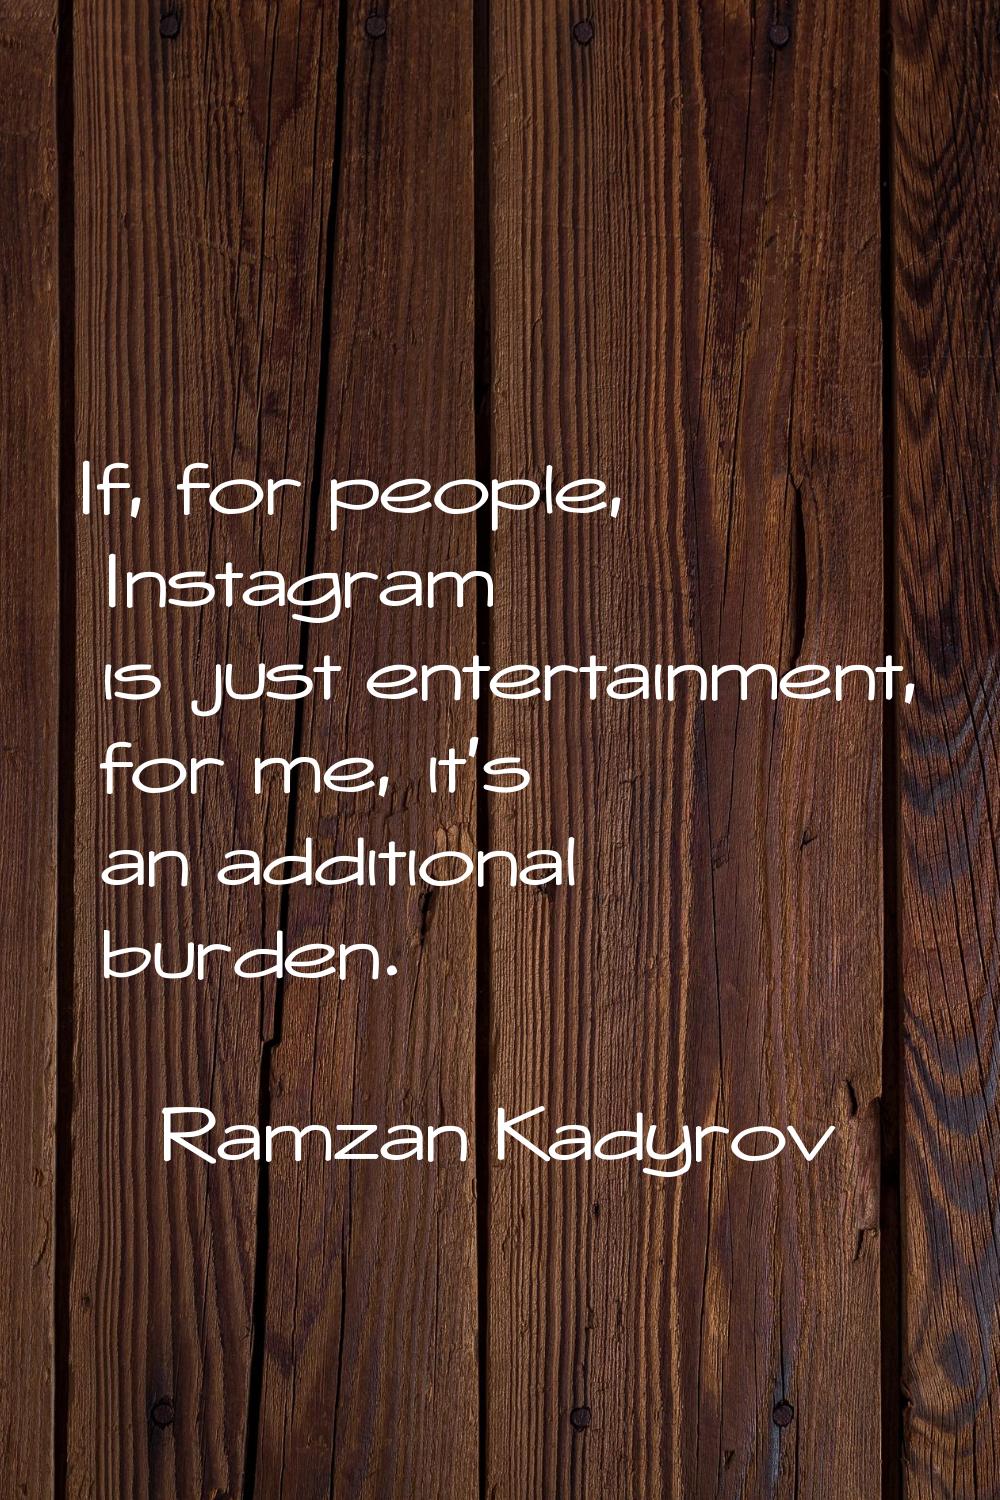 If, for people, Instagram is just entertainment, for me, it's an additional burden.